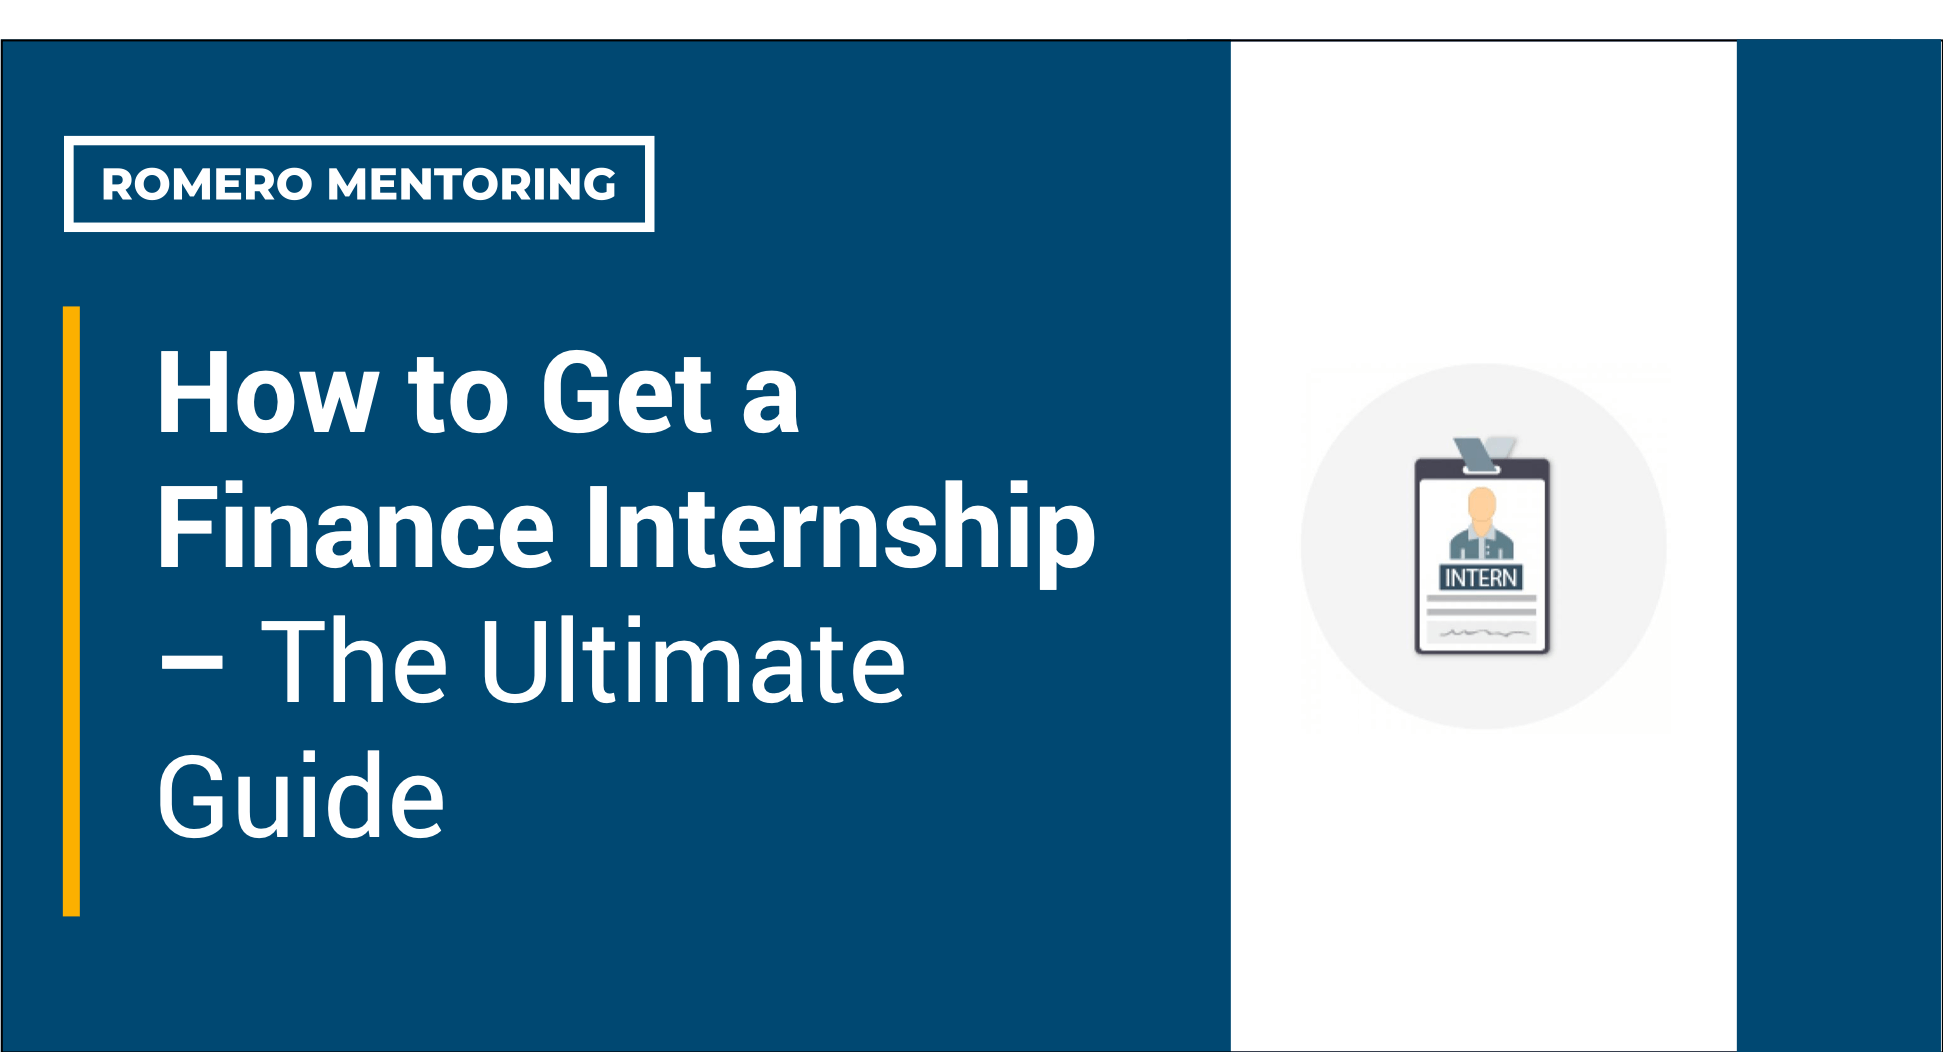 The Ultimate Guide to Landing a Finance Internship